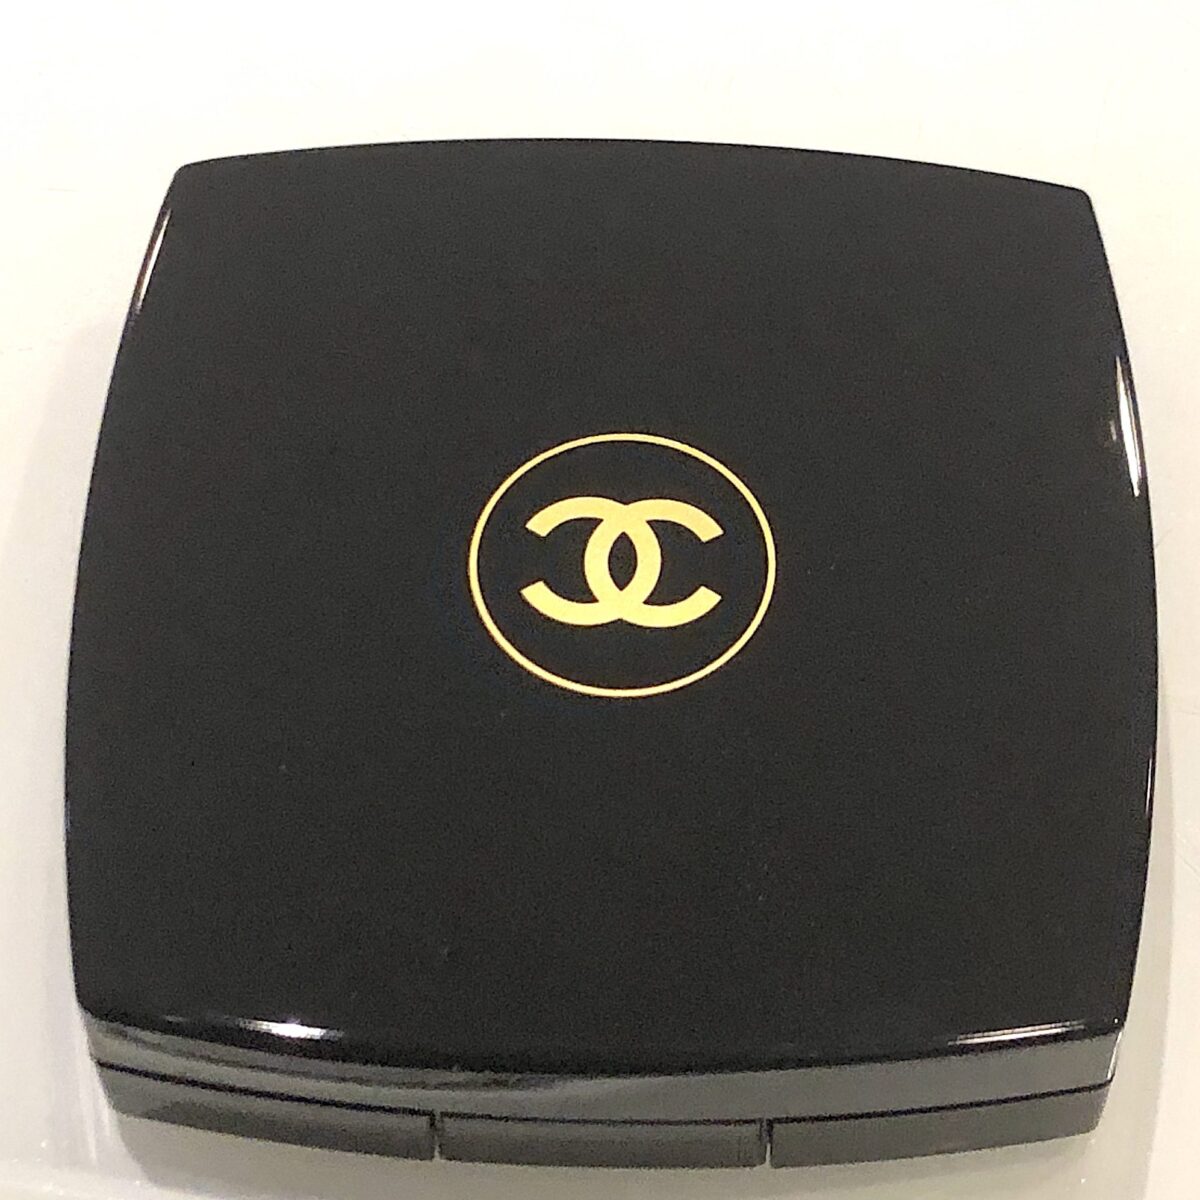 CHANEL'S CLASSIC COMPACT WITH GOLD DOUBLE C'S